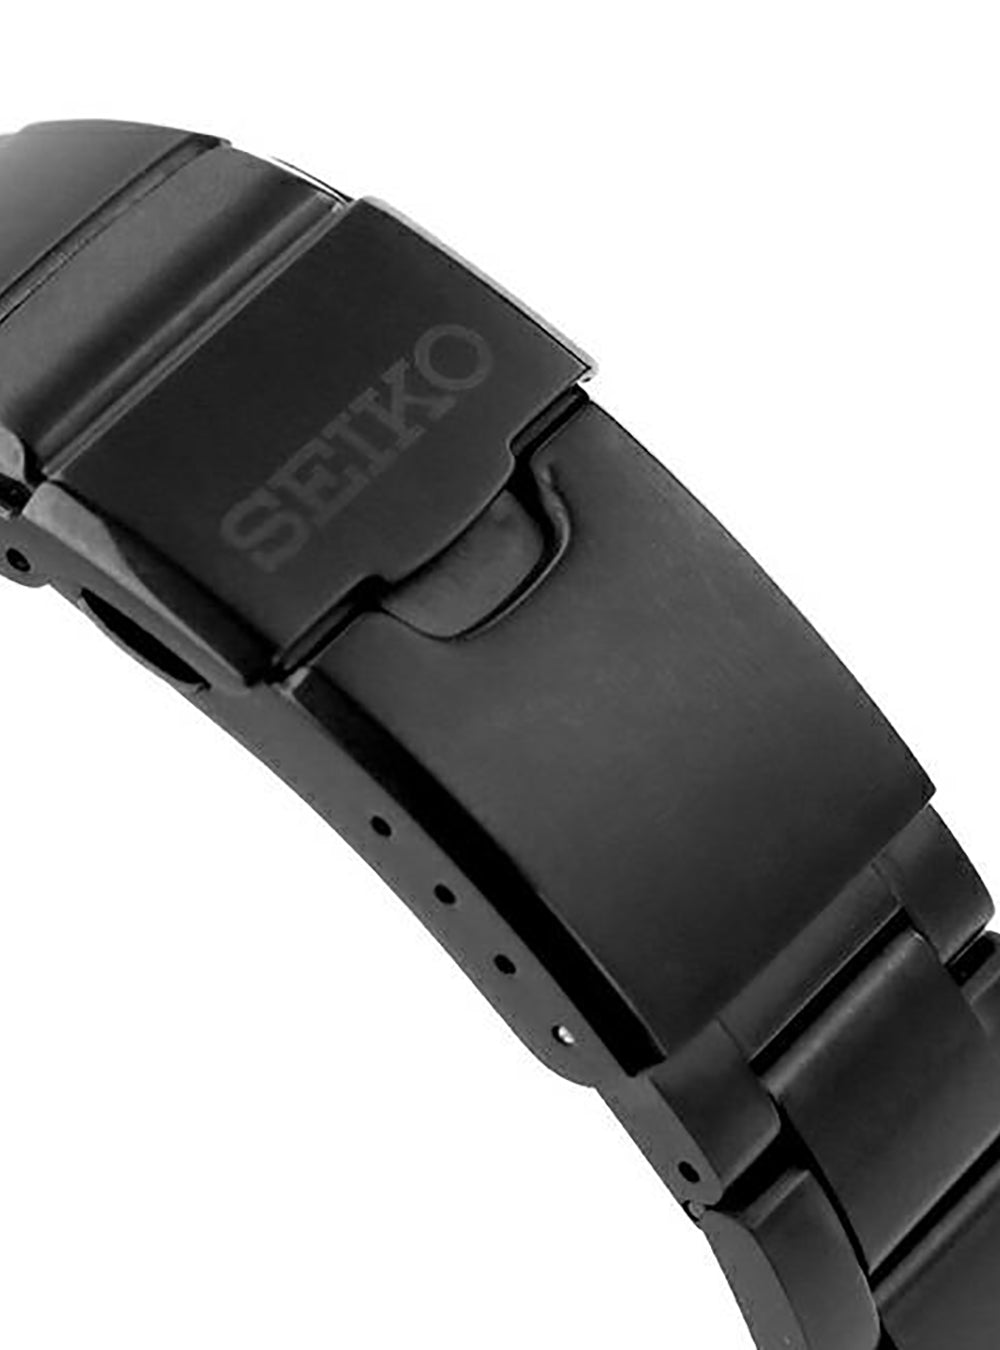 Seiko 5 Stainless Steel Black Arabic Dial Automatic SNKP21 SNKP21J1 SNKP21J  Men's Watch - CityWatches IN